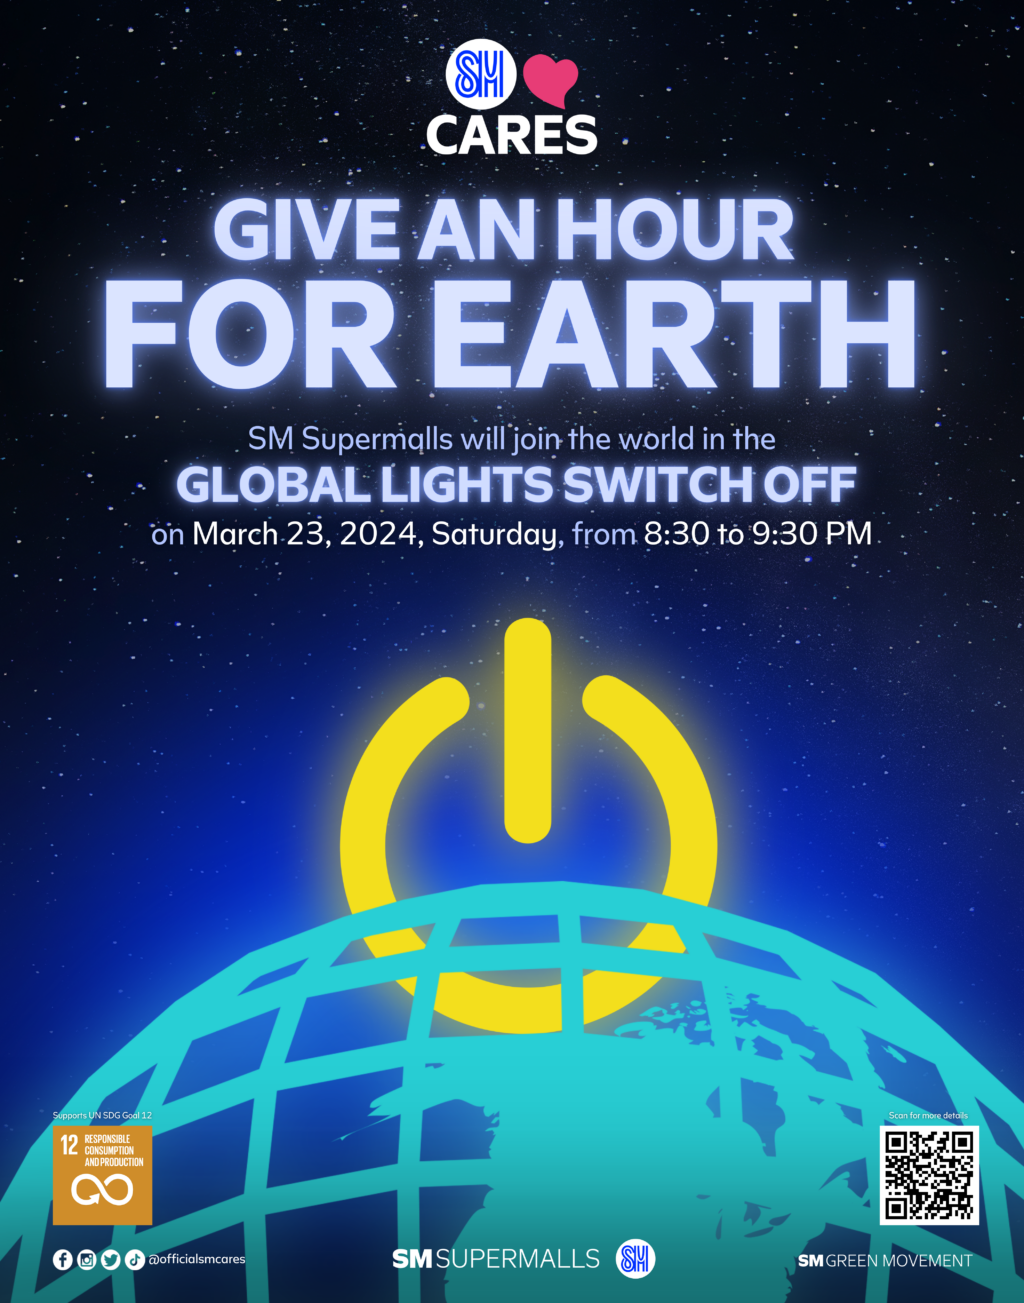 SM Supermalls joins this year's Earth Hour